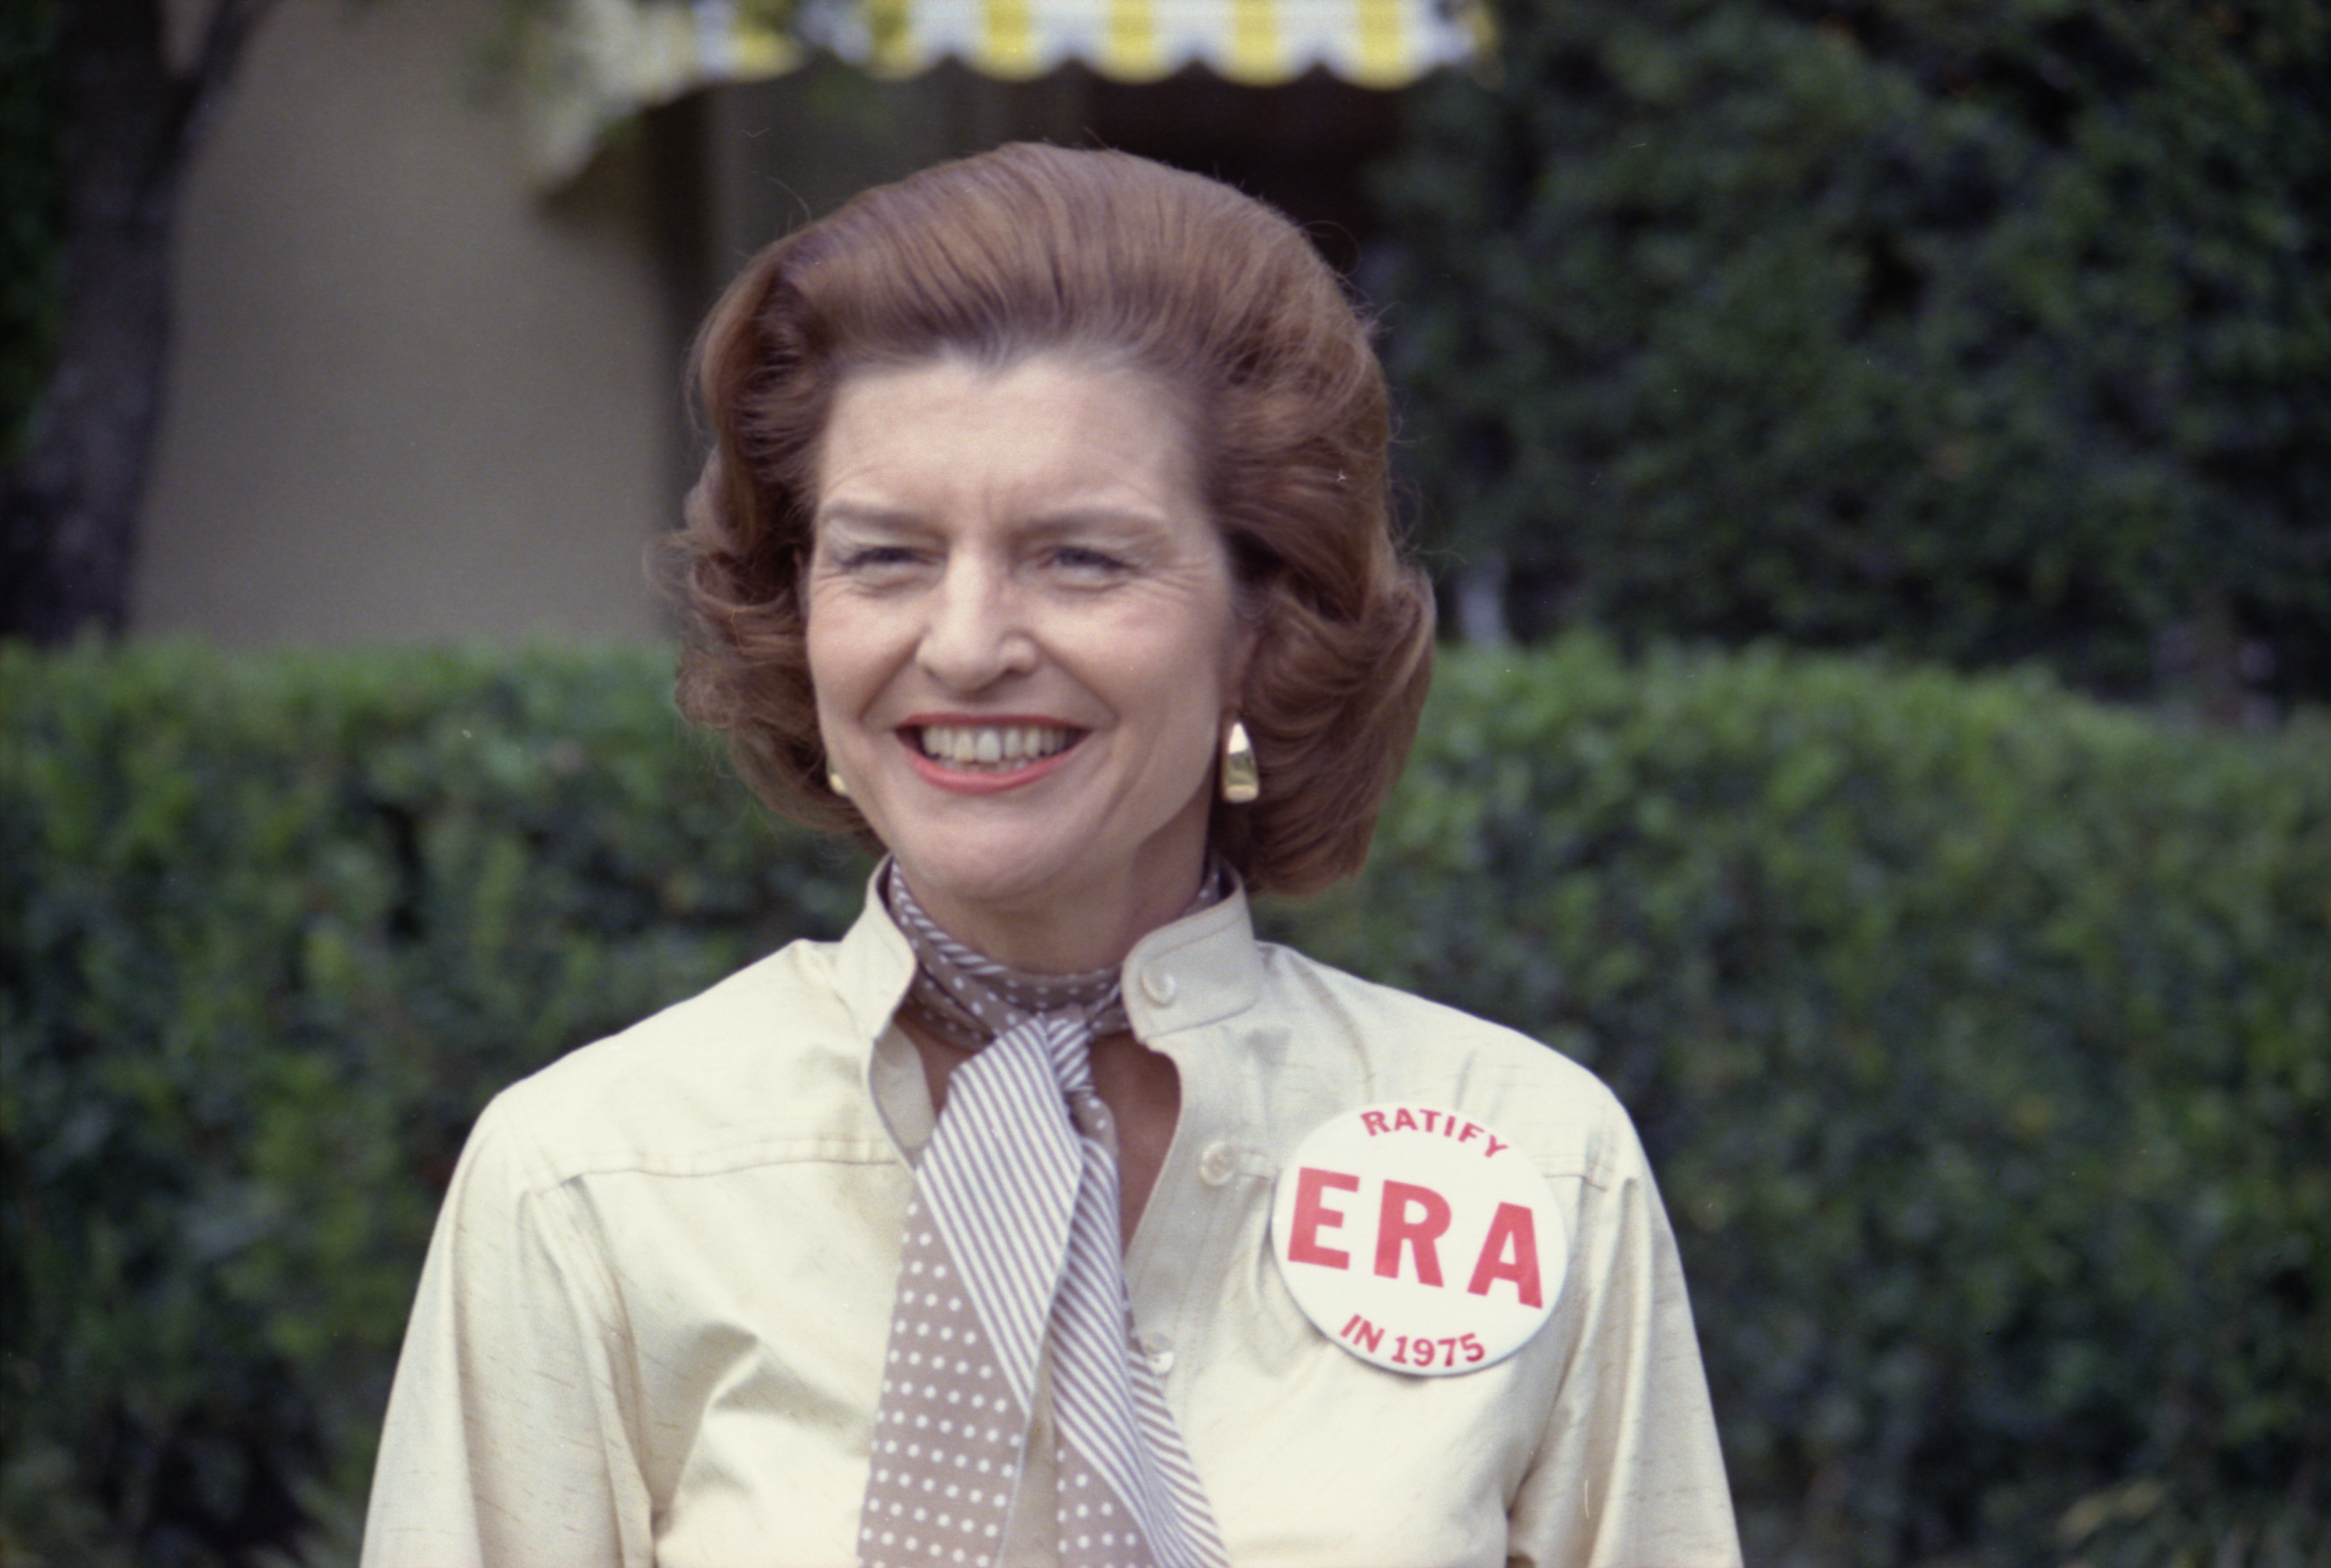 First Lady Betty Ford sports a button expressing her support for ratification of the Equal Rights Amendment while taking some personal time as President Ford plays in the Jackie Gleason Inverrary Classic Celebrities Golf Tournament.  Inverrary Country Club, Hollywood, Florida.   February 26, 1975.  